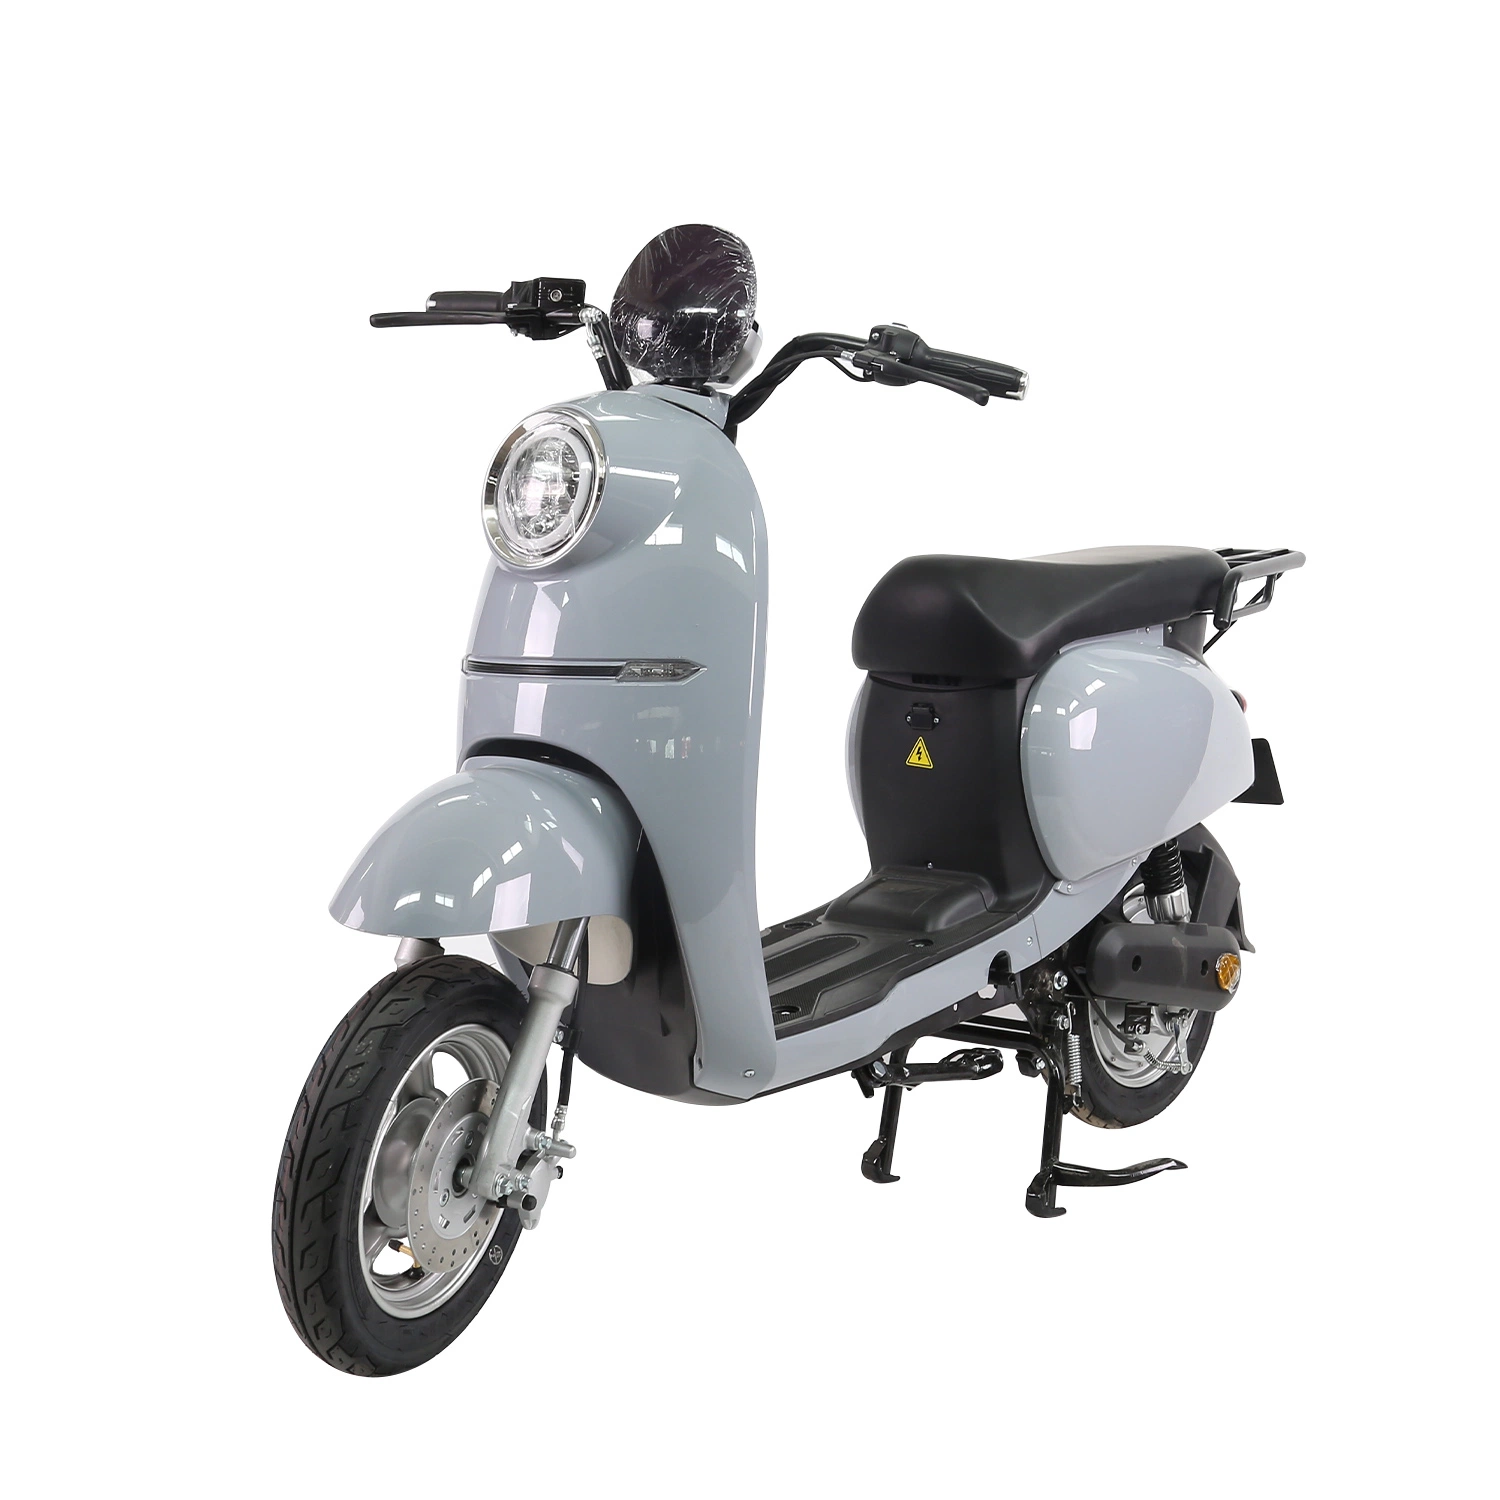 1500W Max Speed 50km/H and Max Range 90km Vespa Two Sets of 70V35ah Low-Carbon Electric Motorcycle Control System LED Light Vehicle Girl Cool